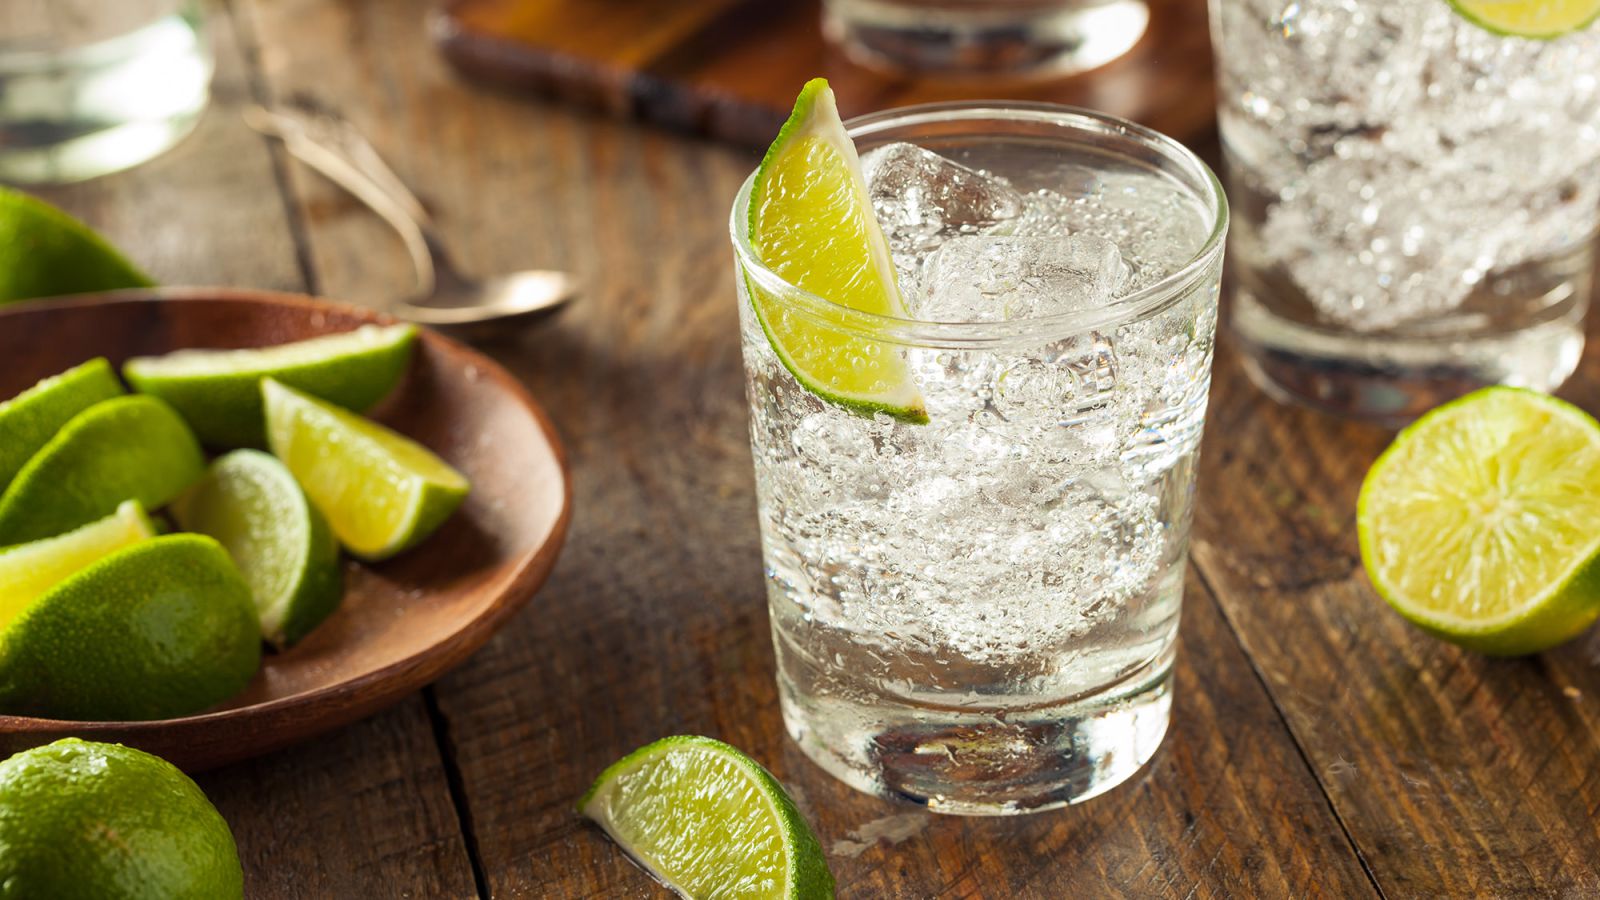 Gin Sales on the Rise According To Research